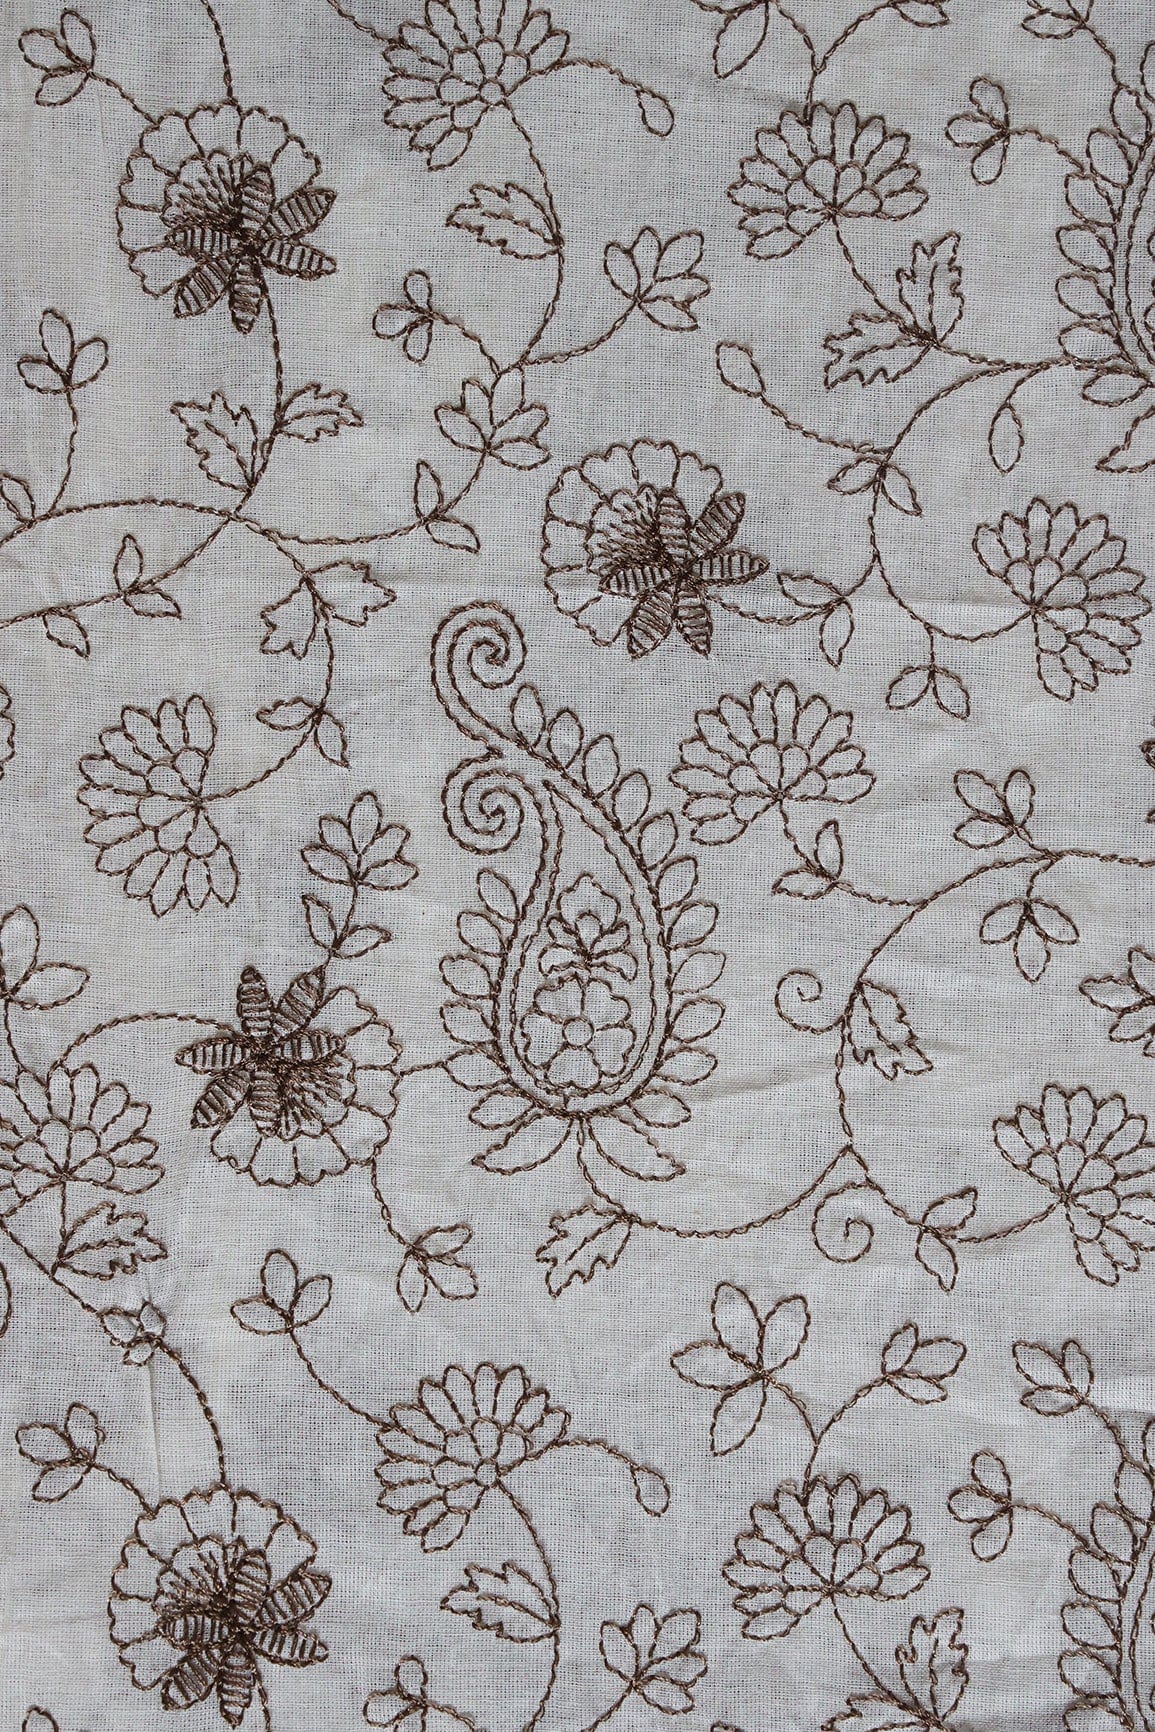 doeraa Embroidery Fabrics Beautiful Brown Thread Floral Embroidery Work On White Organic Cotton Fabric